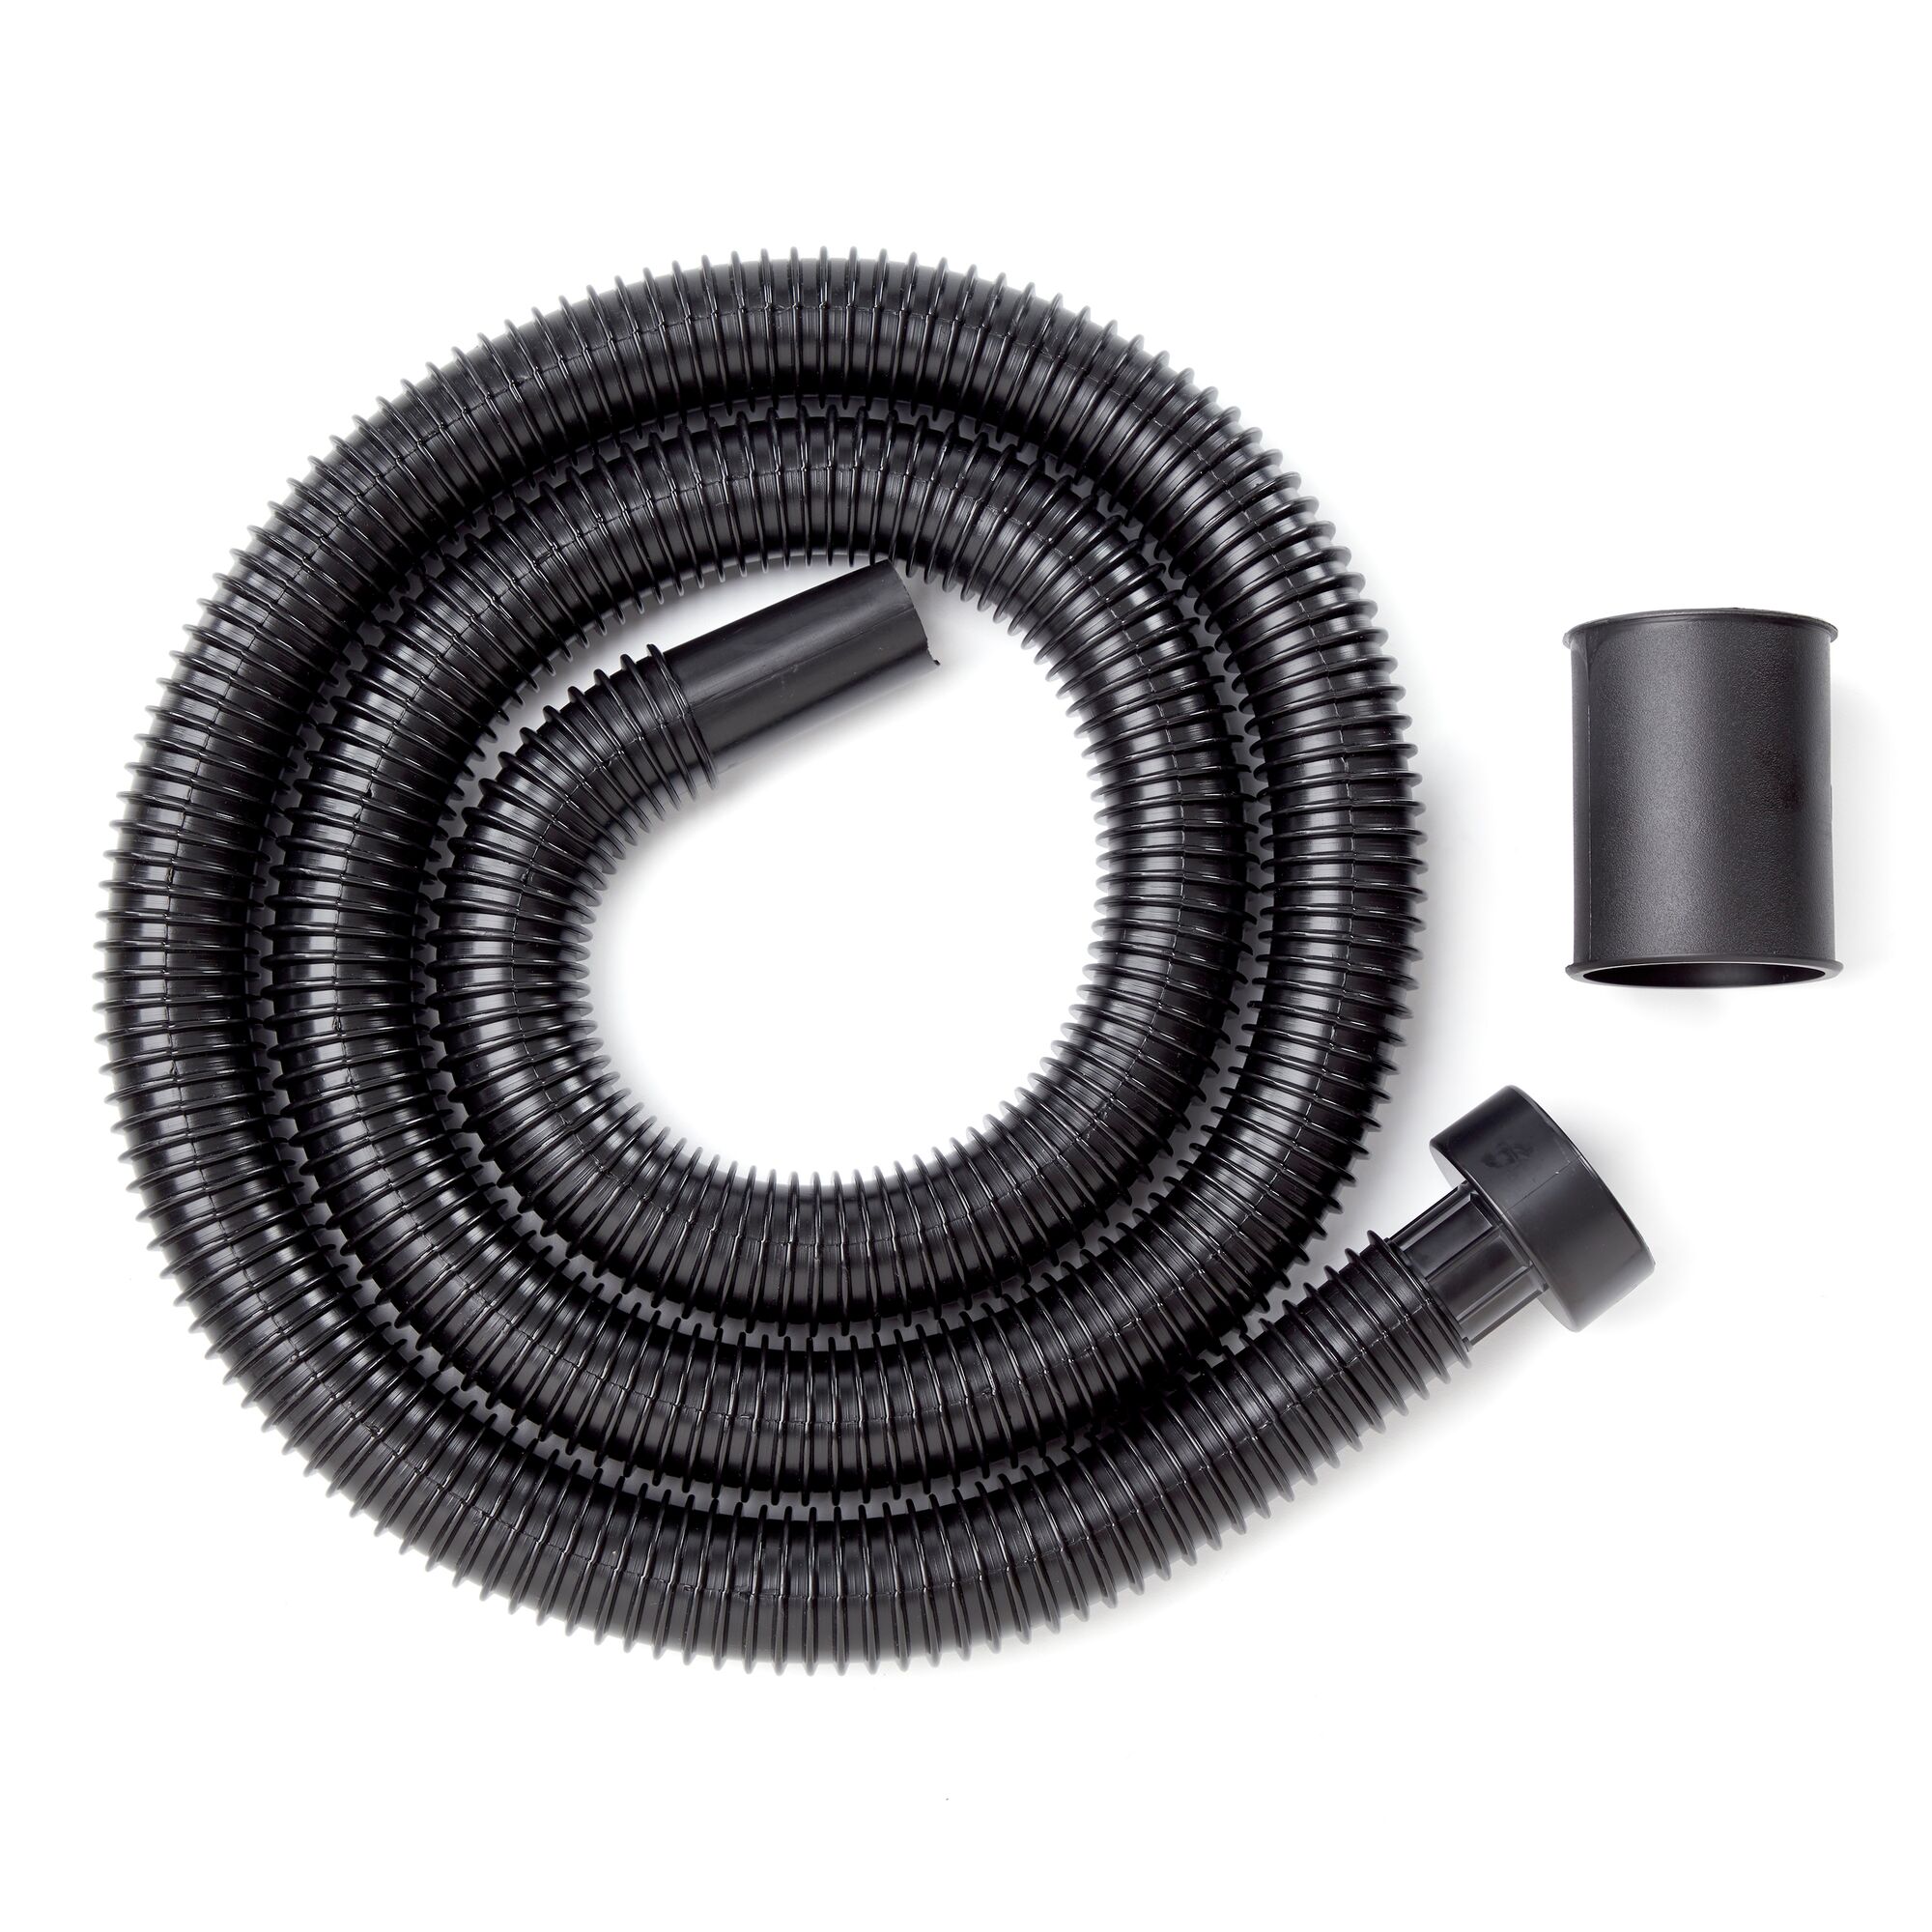 Top view of CRAFTSMAN 1-1/4 inch x 6 foot wet dry shop vacuum hose coiled up with connector